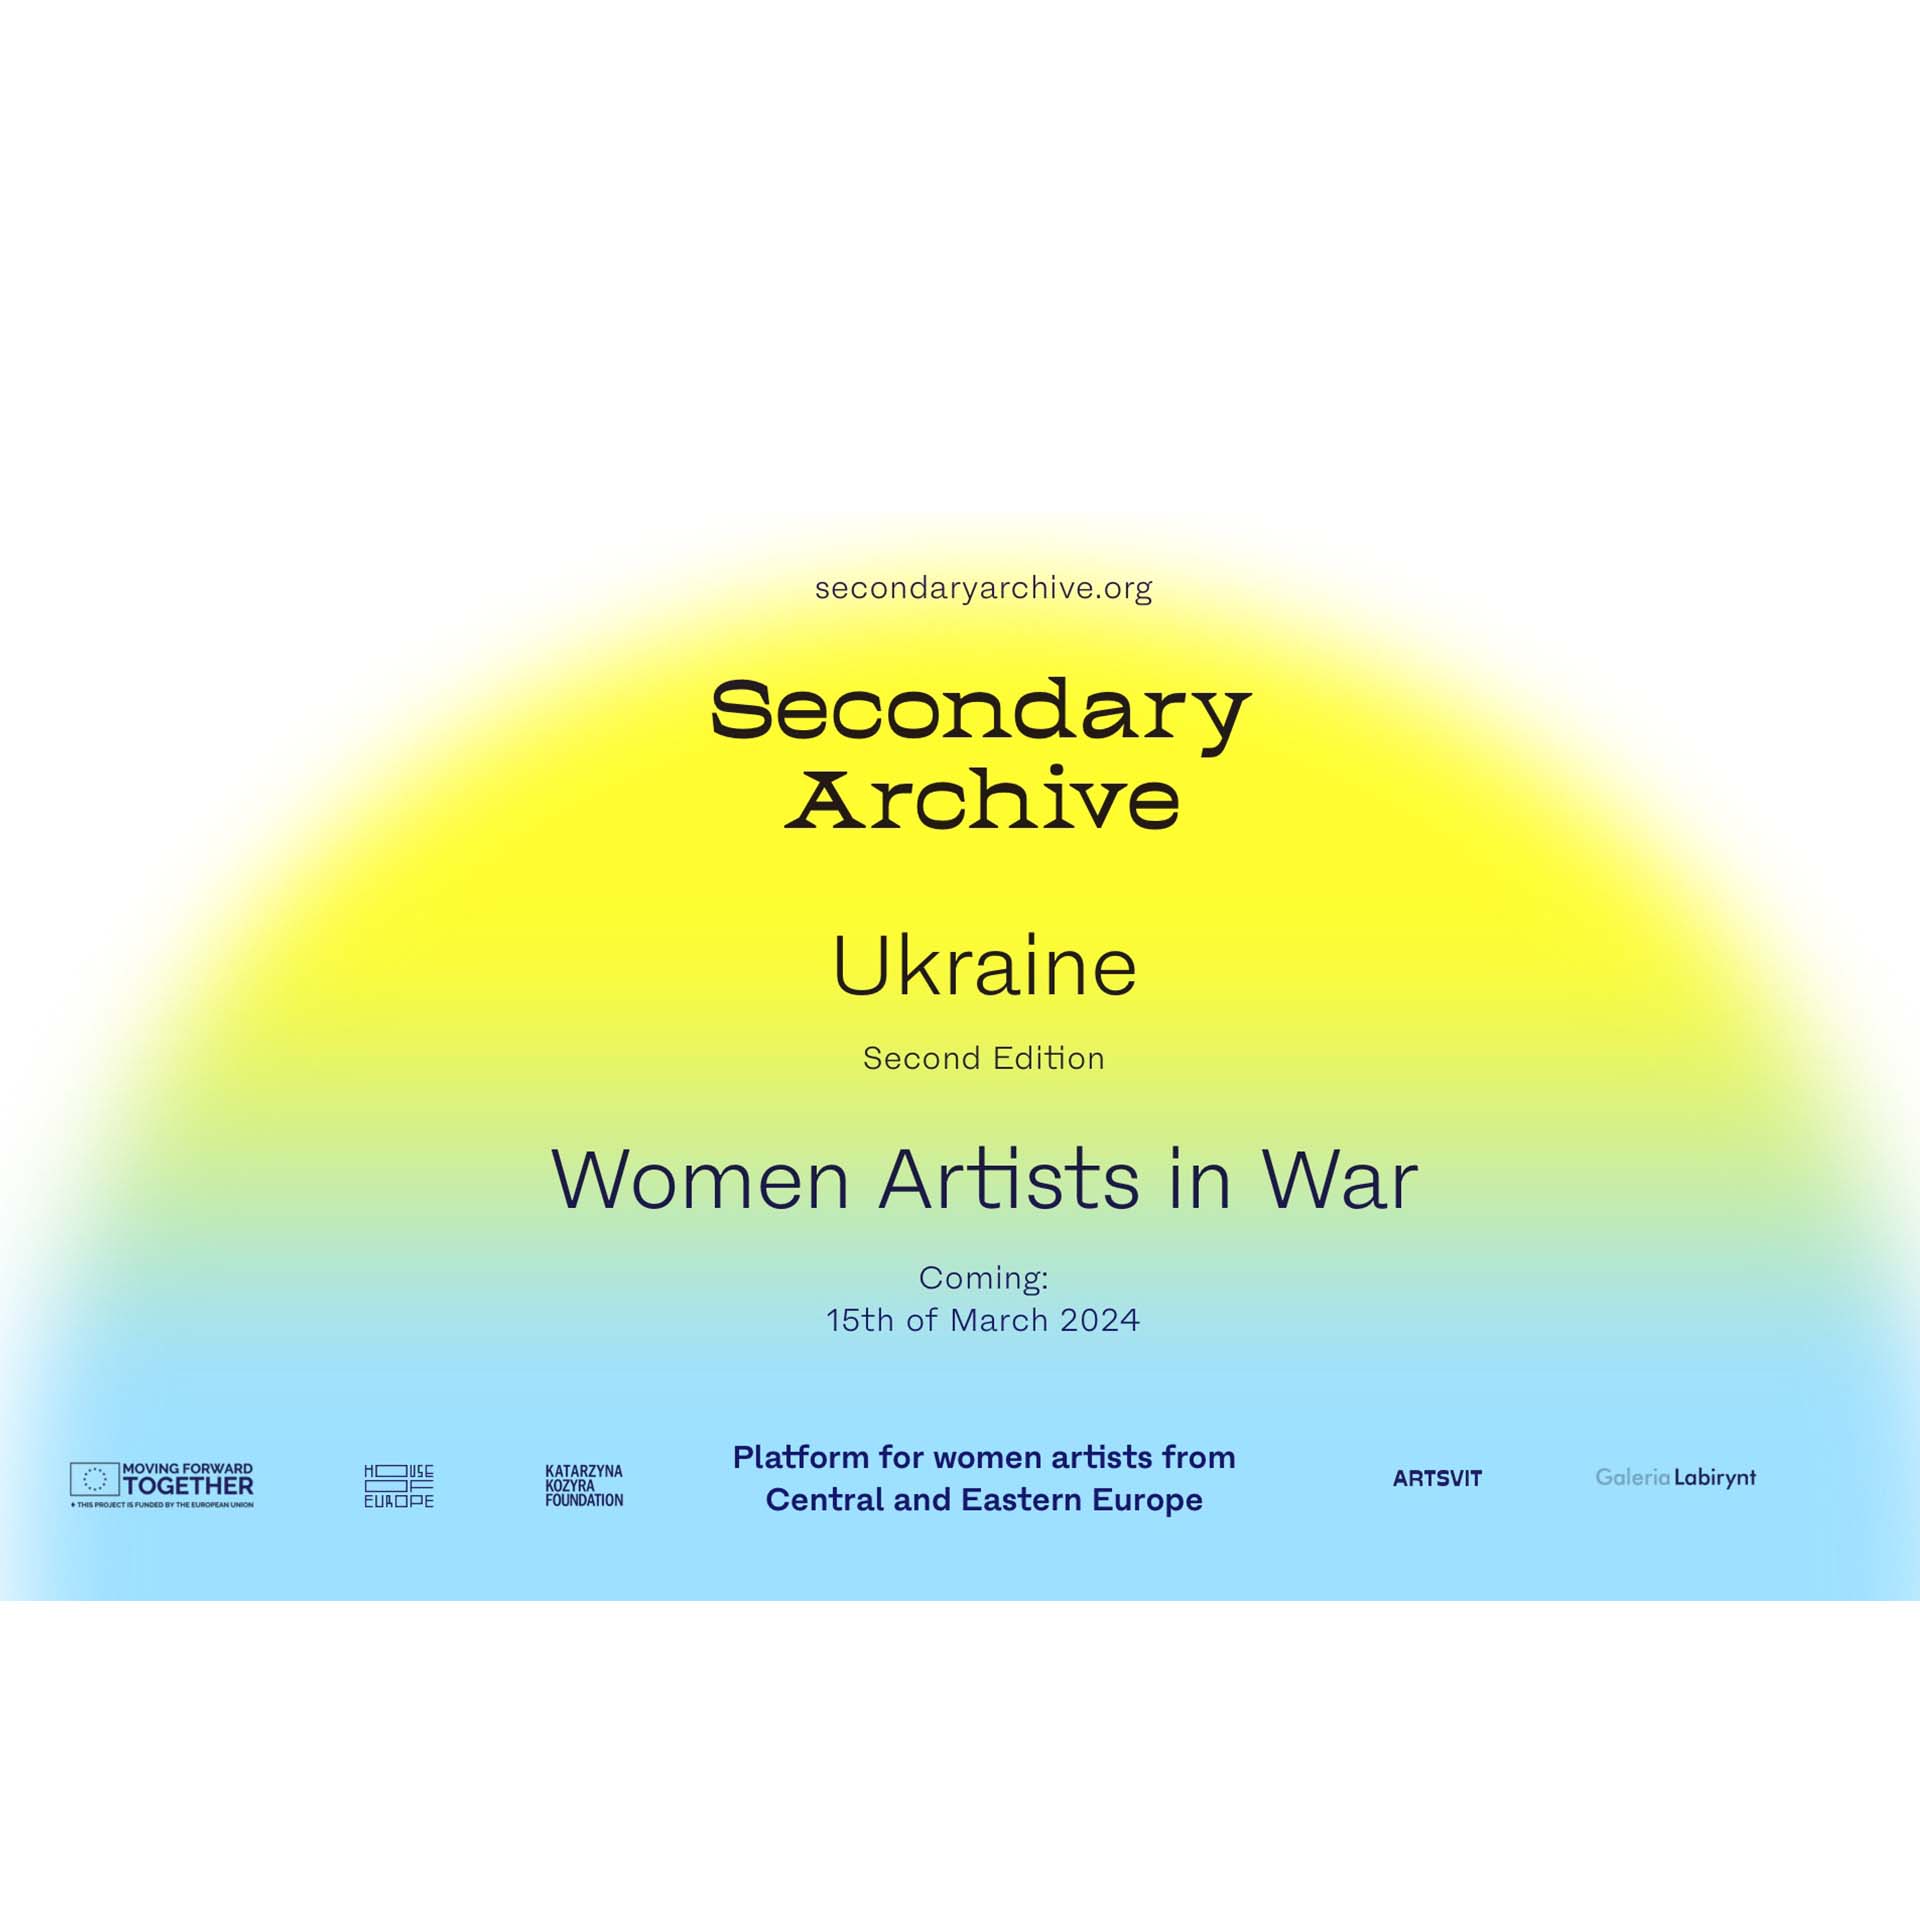 ‘Secondary Archive. Women Artists in War’ – the experience of war by women artists